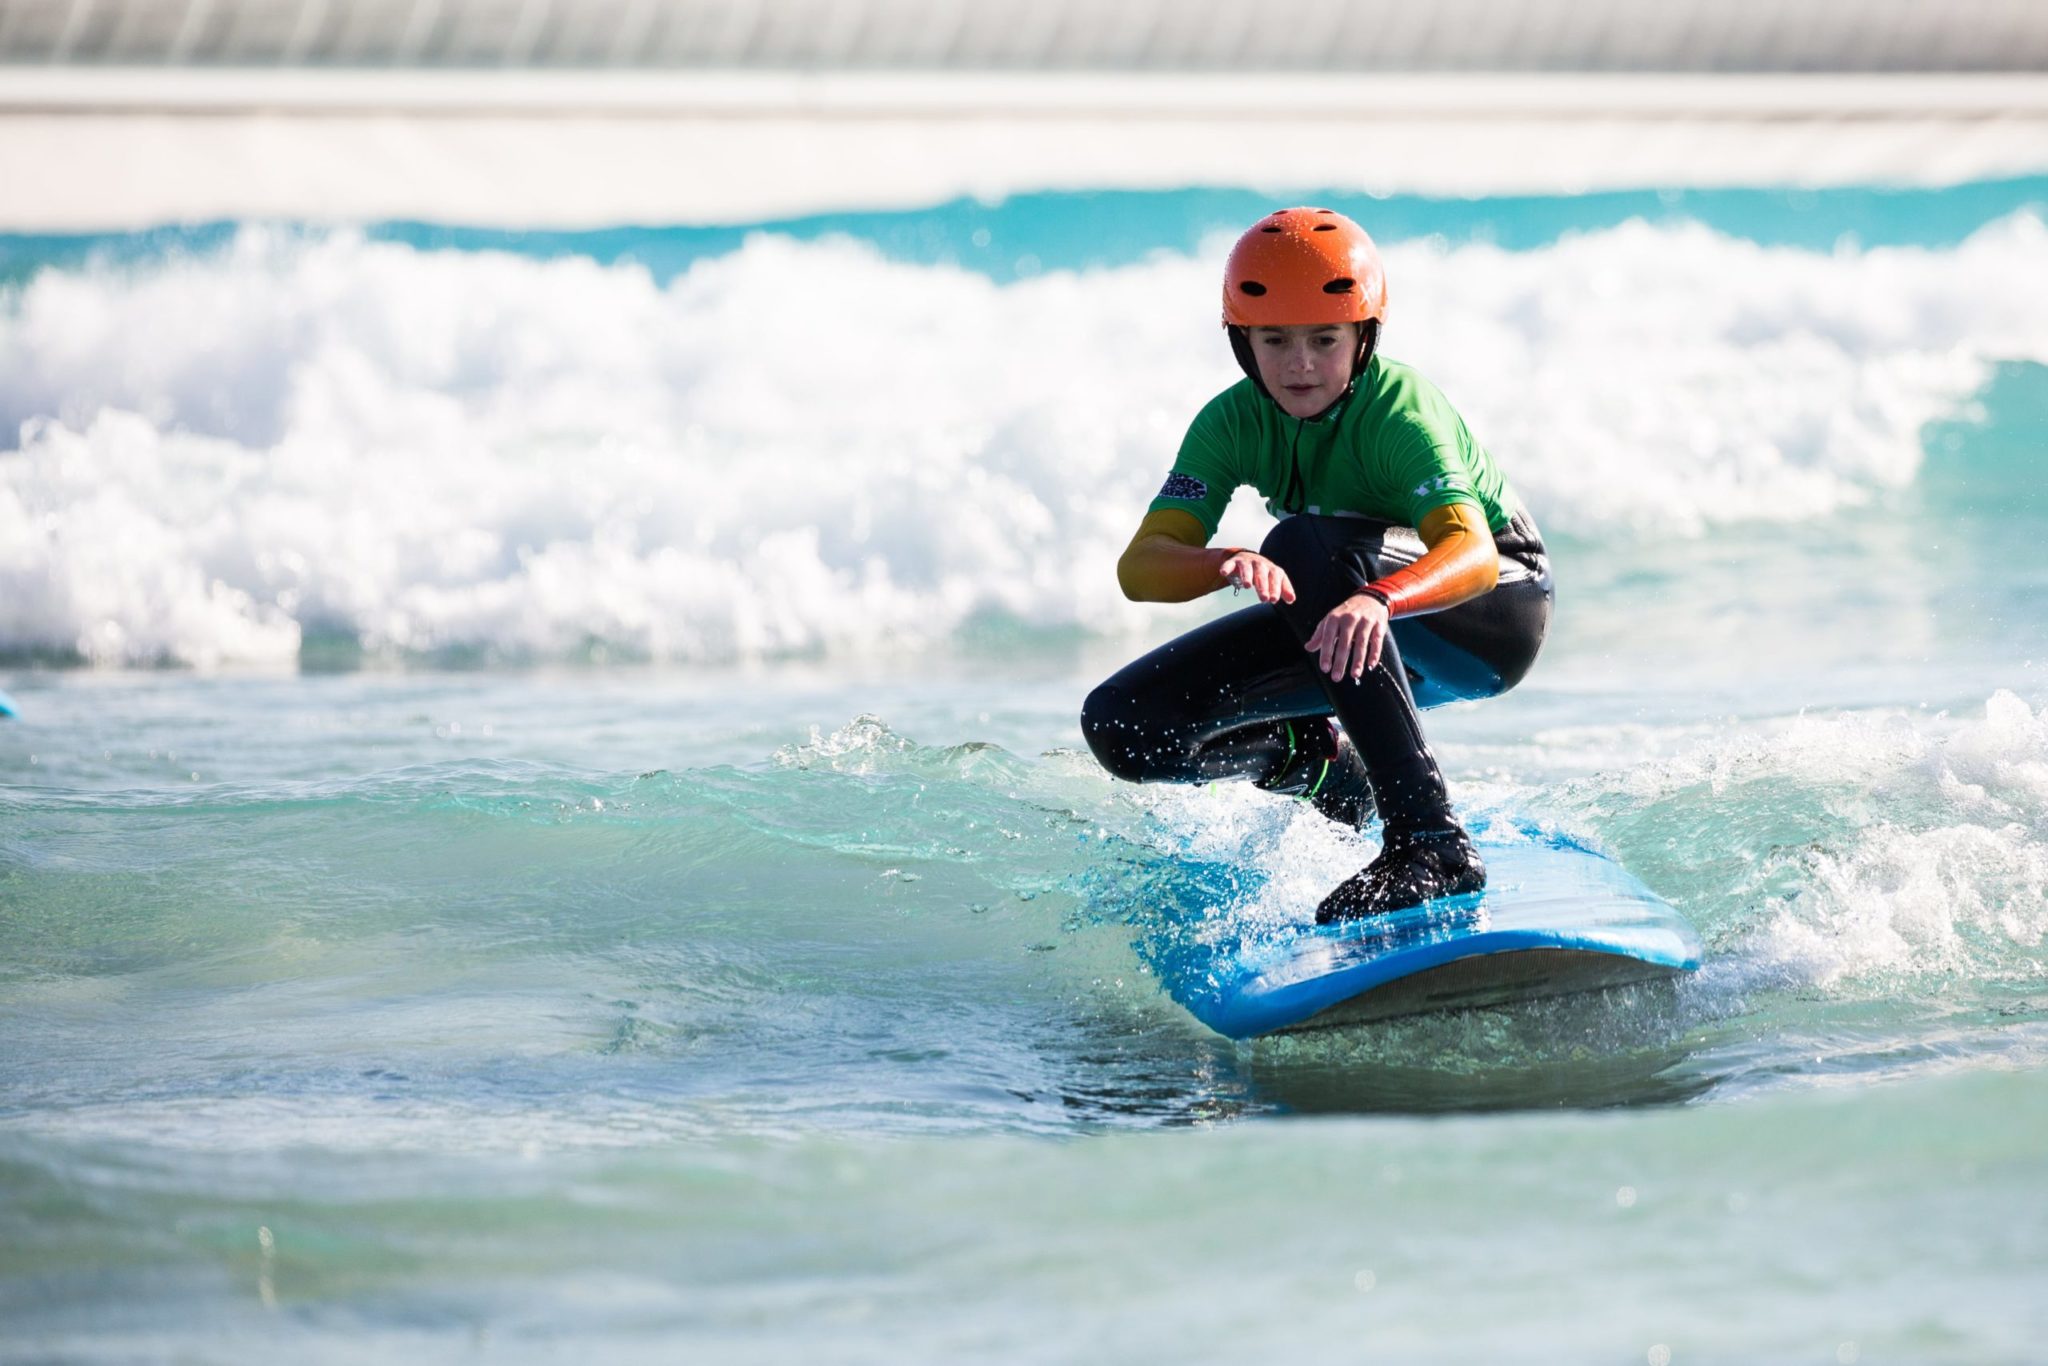 Boy learning to surf at the Wave surfing inland lake near Bristol